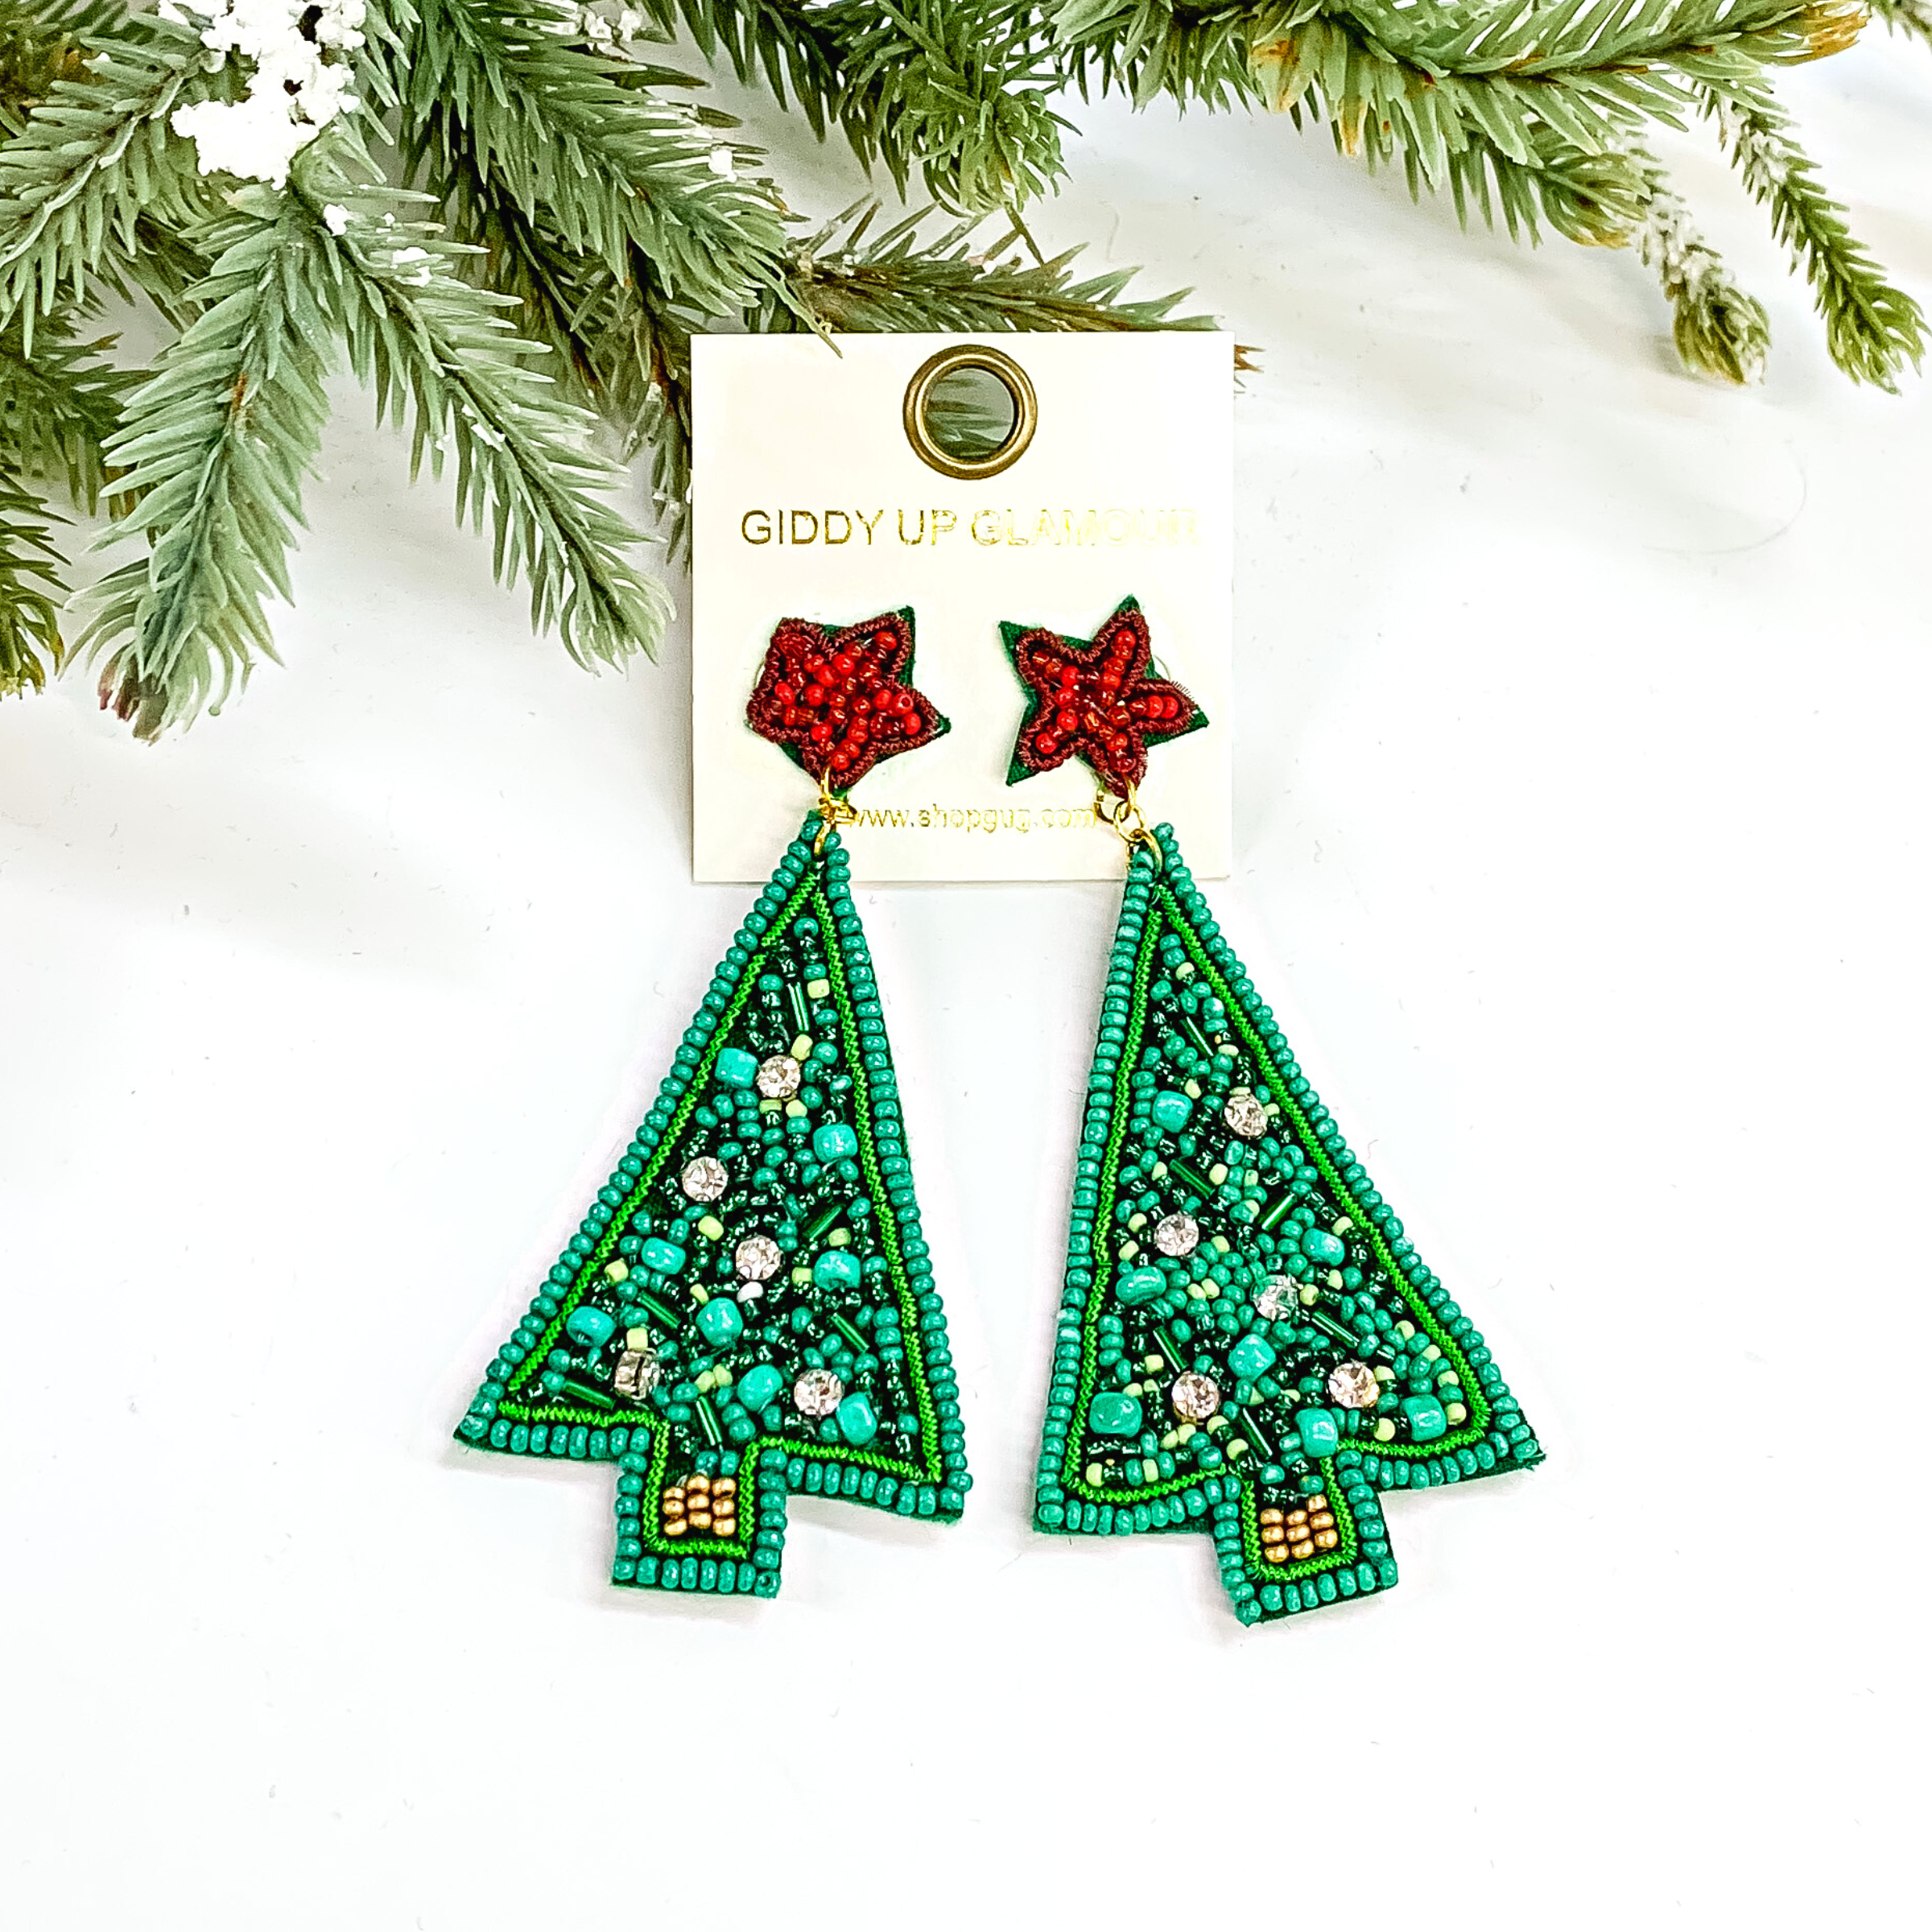 These are triangle shaped Christmas tree earrings in green with a red star  as the postback. There are different shades and shapes of green beads with  five clear crystals as ornaments. These earrings are taken on a white background with a tree in the back with snow as decor.